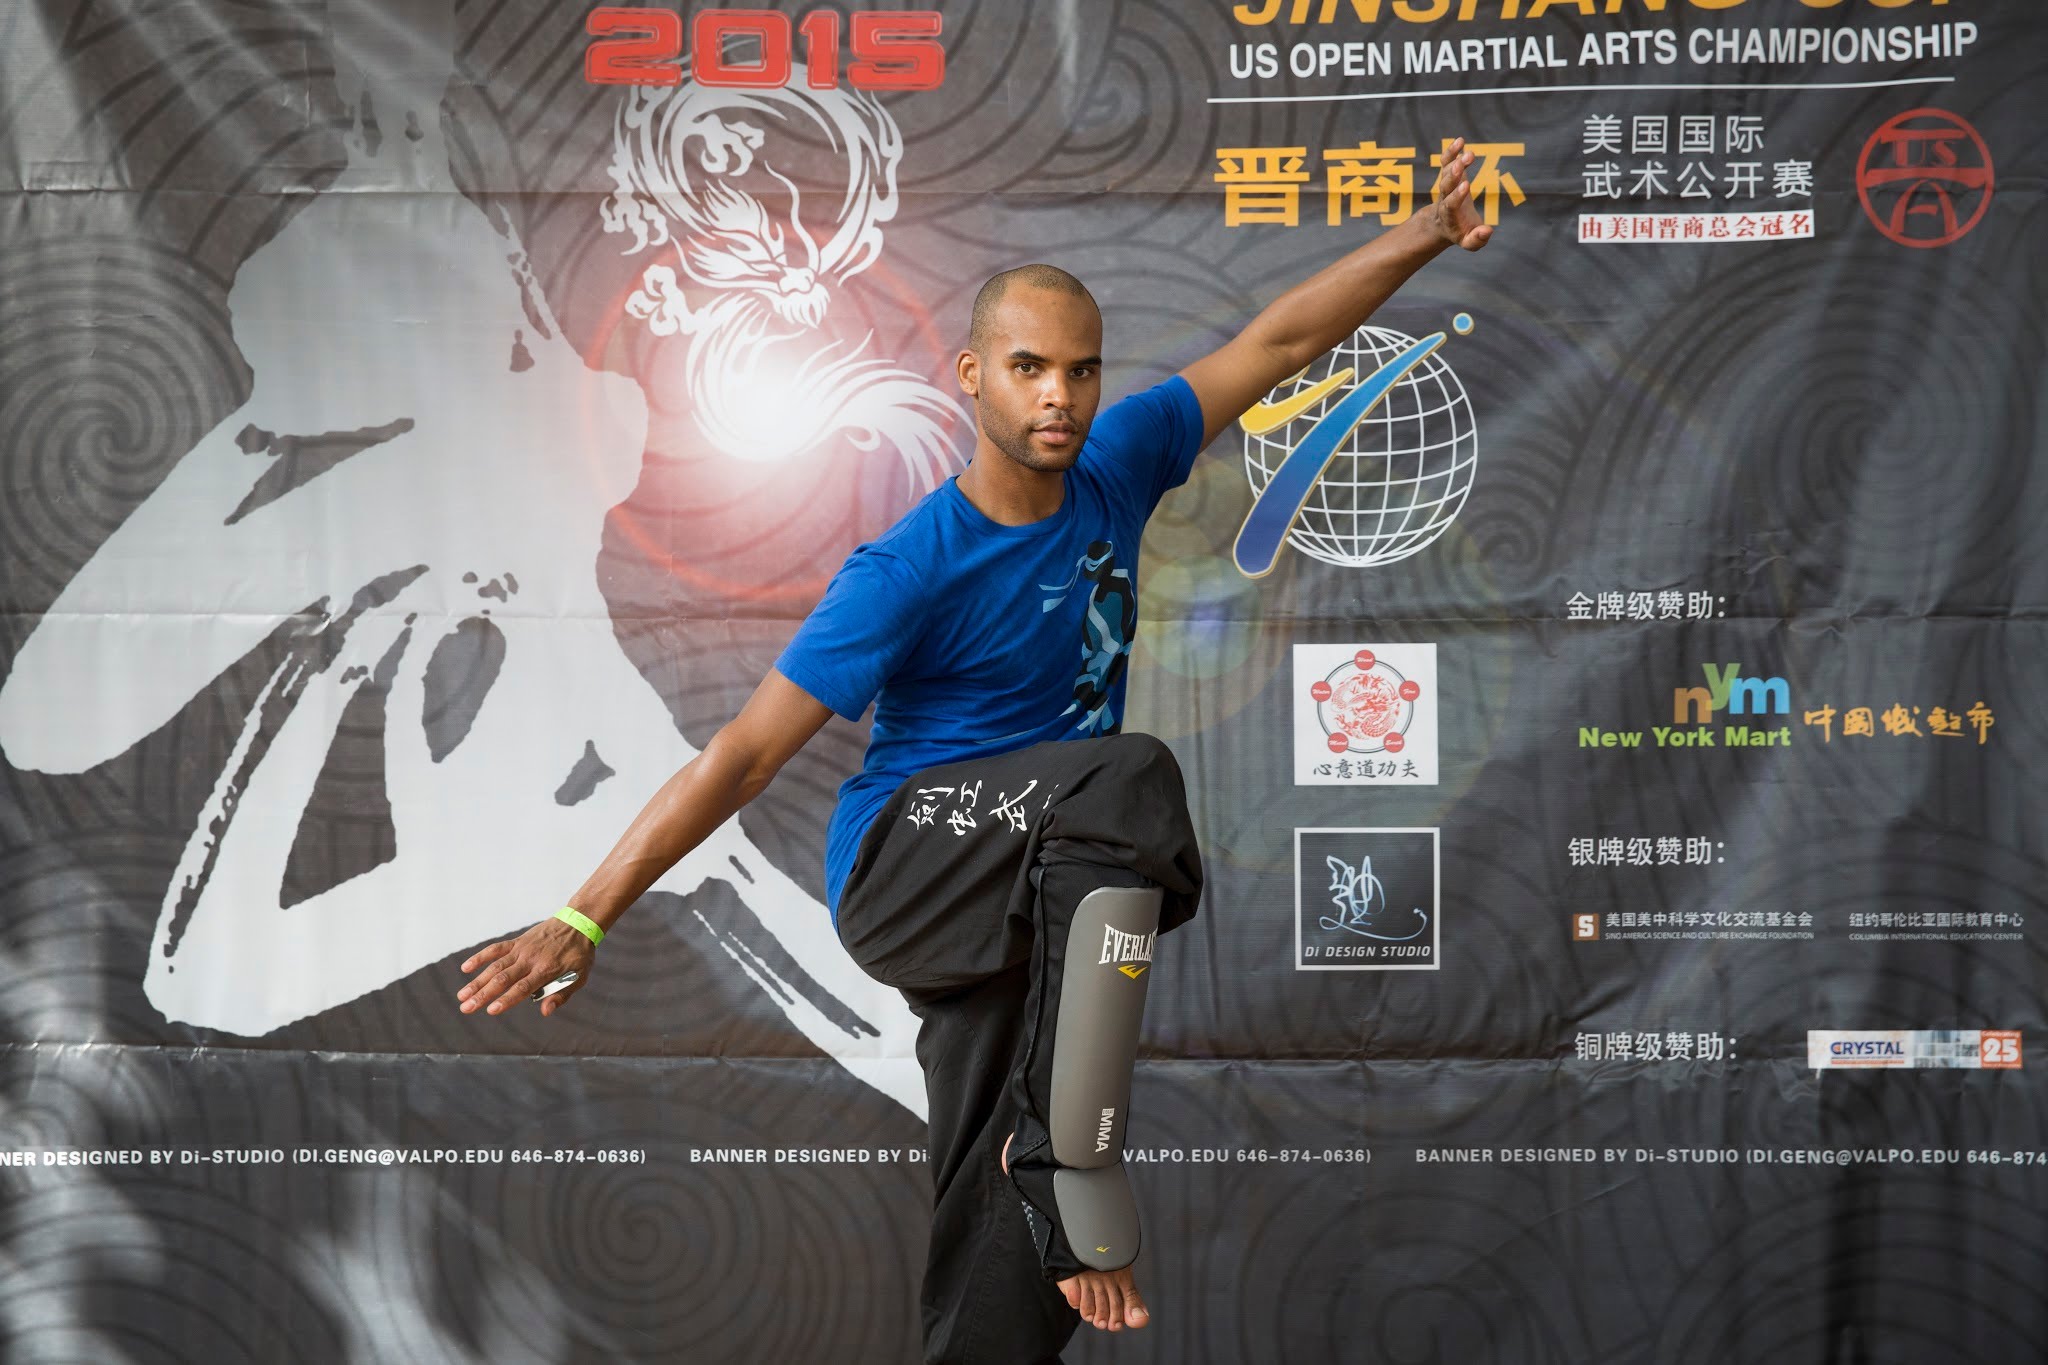 Competitor of The US Open Martial Arts Championship posing for a picture